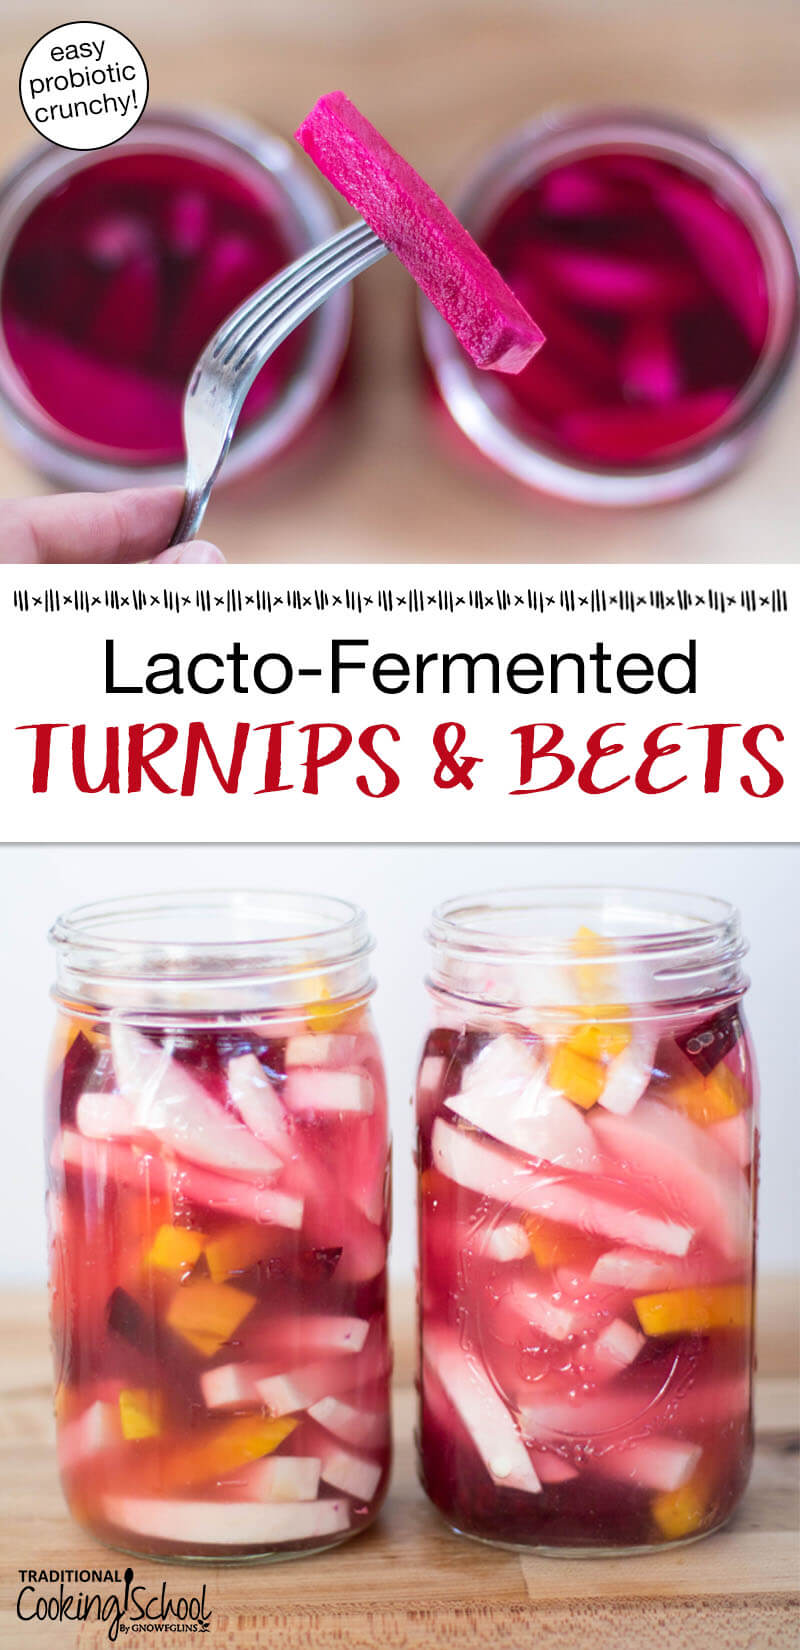 Photo collage of turnips, beets, and golden beets in quart-sized glass jars filled with brine, ready to be fermented, and a close-up shot of a pickled beet slice after fermenting. Text overlay says: "Lacto-Fermented Turnips & Beets (easy probiotic crunchy!)"